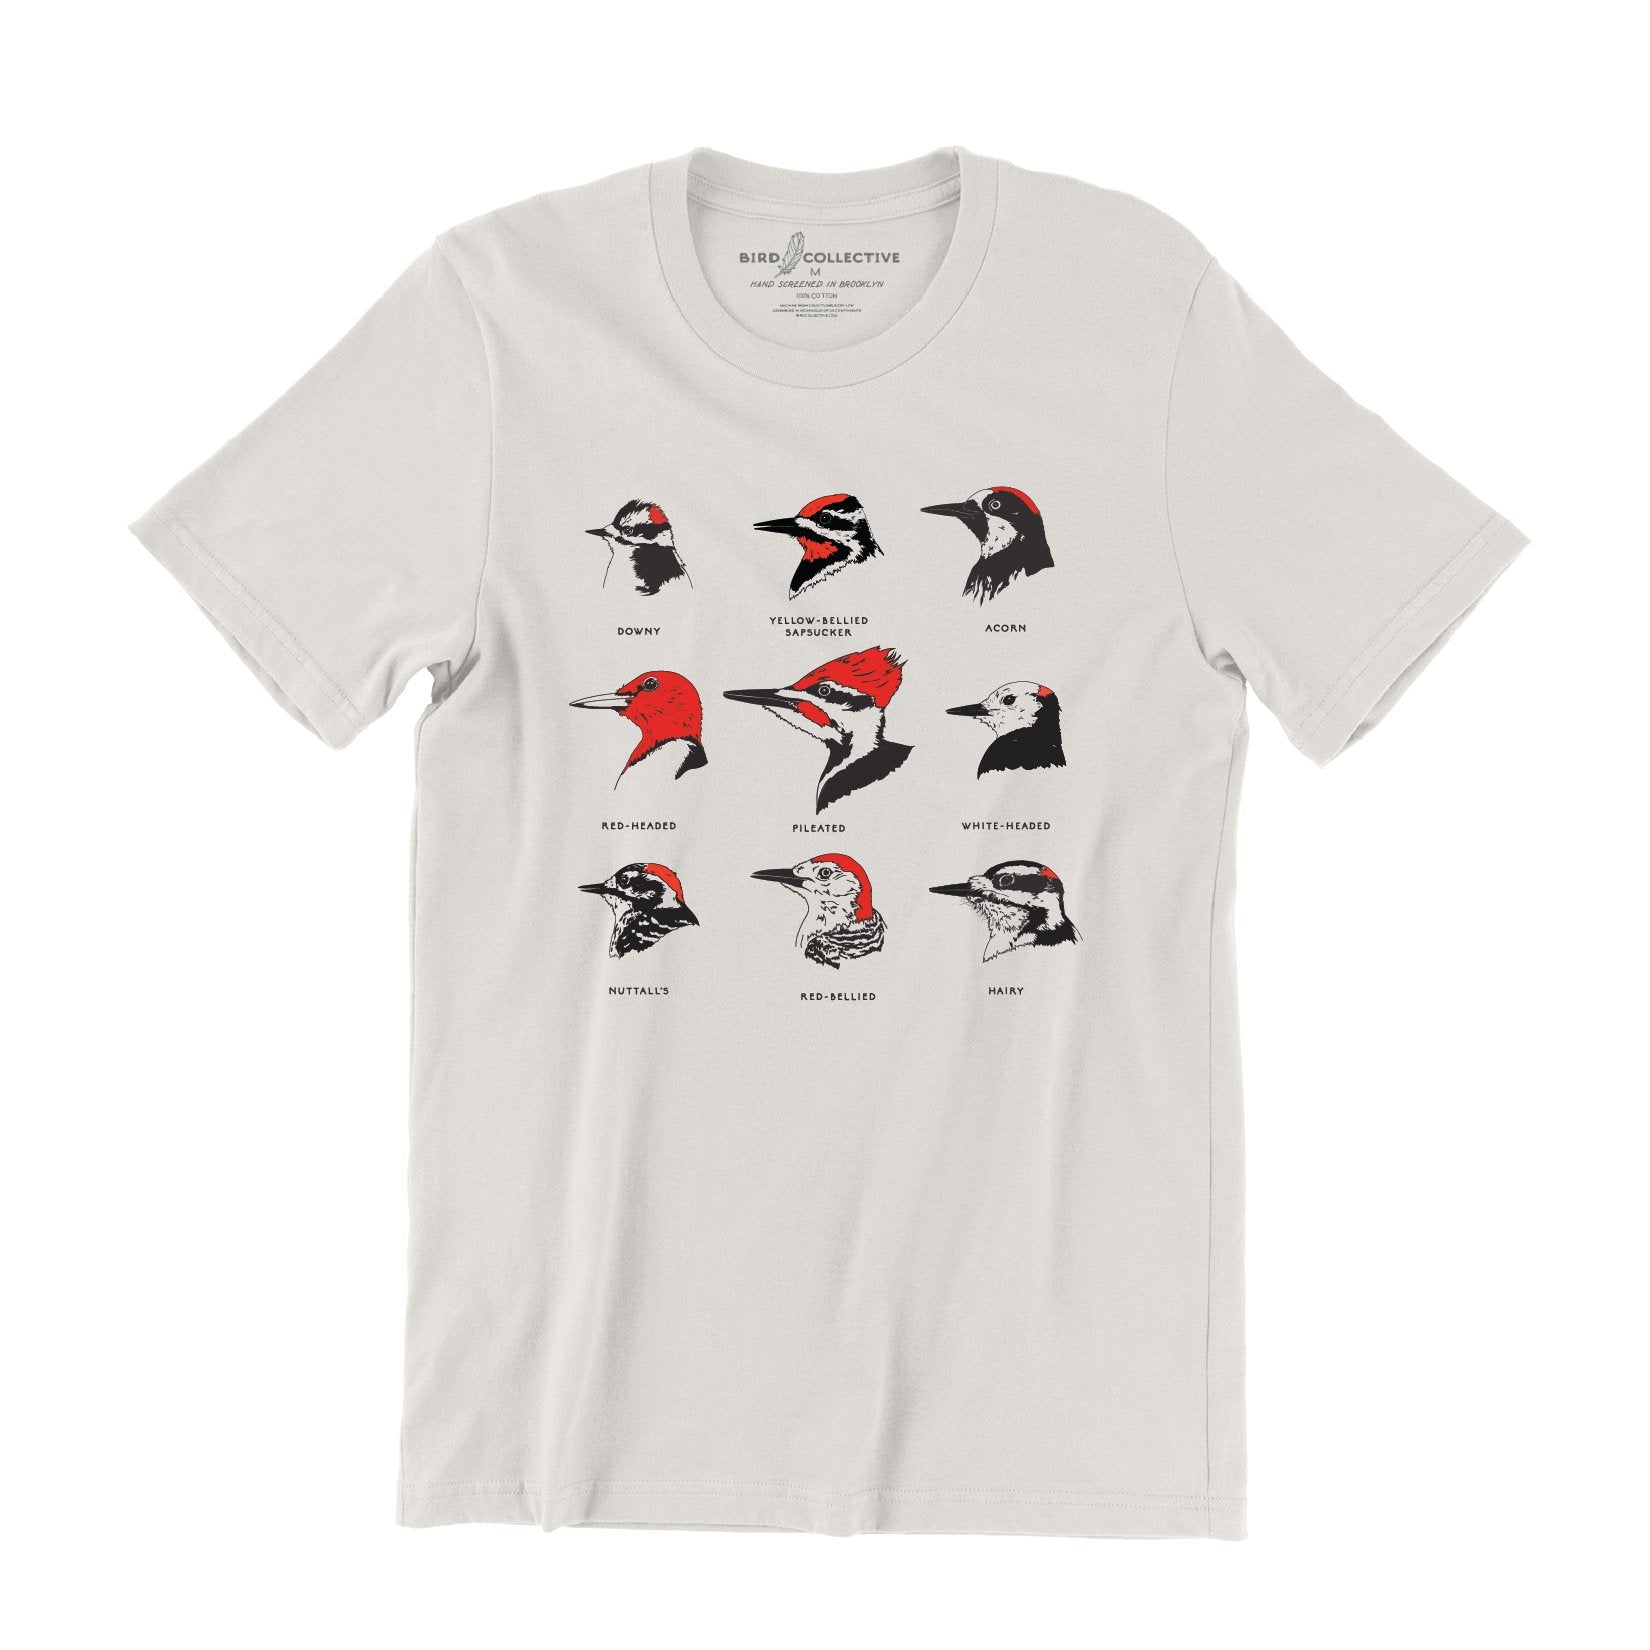 Bird Collective - Woodpeckers T-Shirt - XS - Vintage White